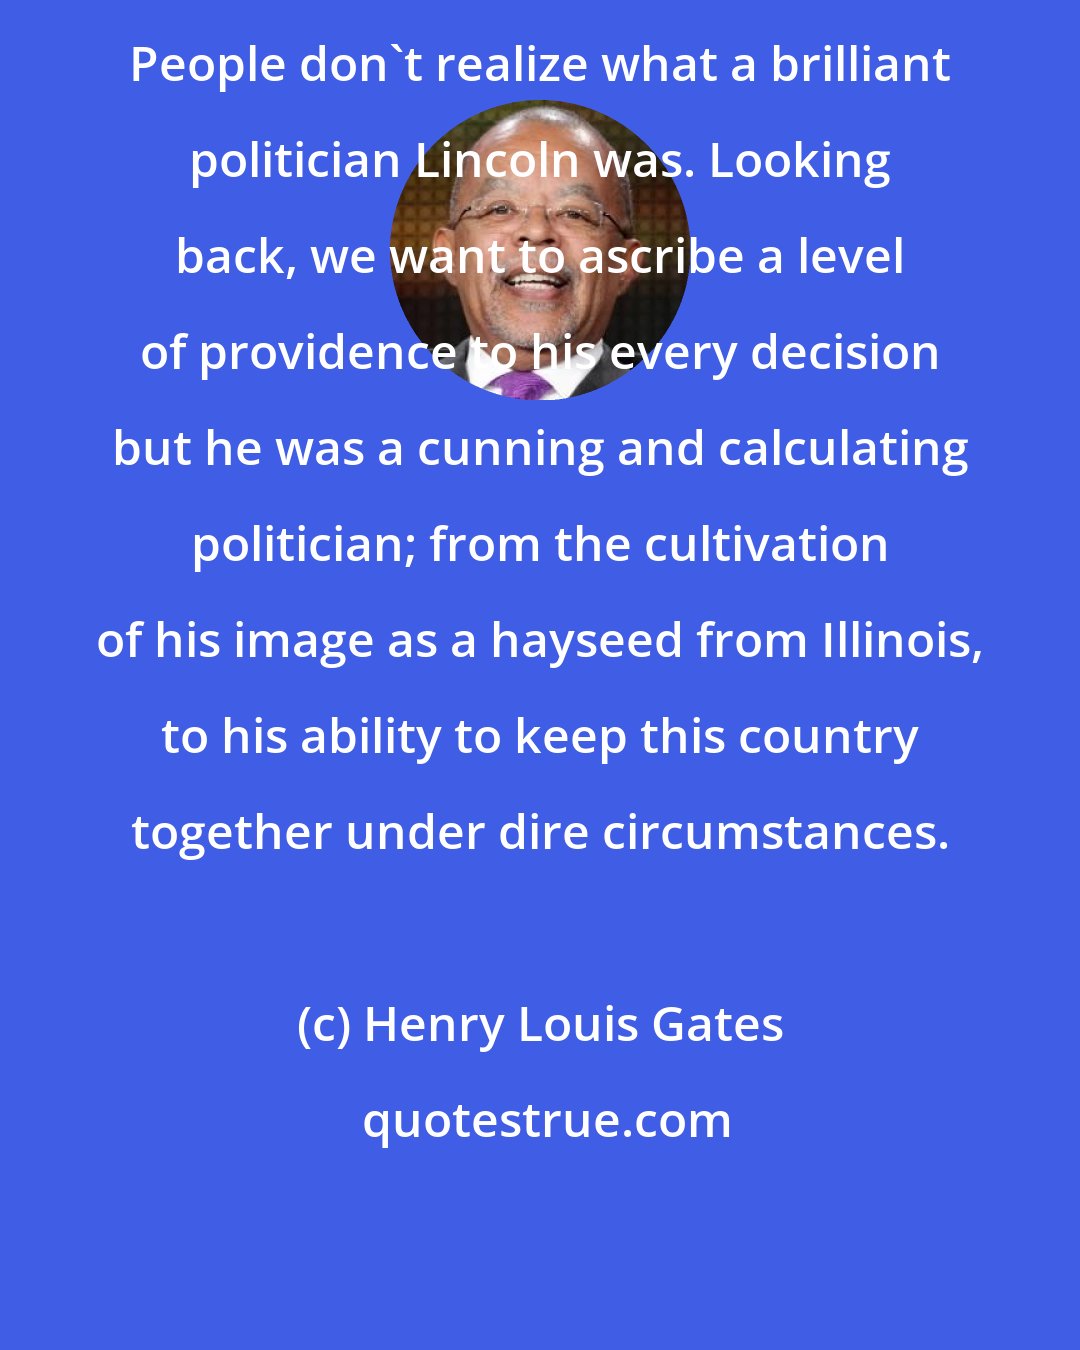 Henry Louis Gates: People don't realize what a brilliant politician Lincoln was. Looking back, we want to ascribe a level of providence to his every decision but he was a cunning and calculating politician; from the cultivation of his image as a hayseed from Illinois, to his ability to keep this country together under dire circumstances.